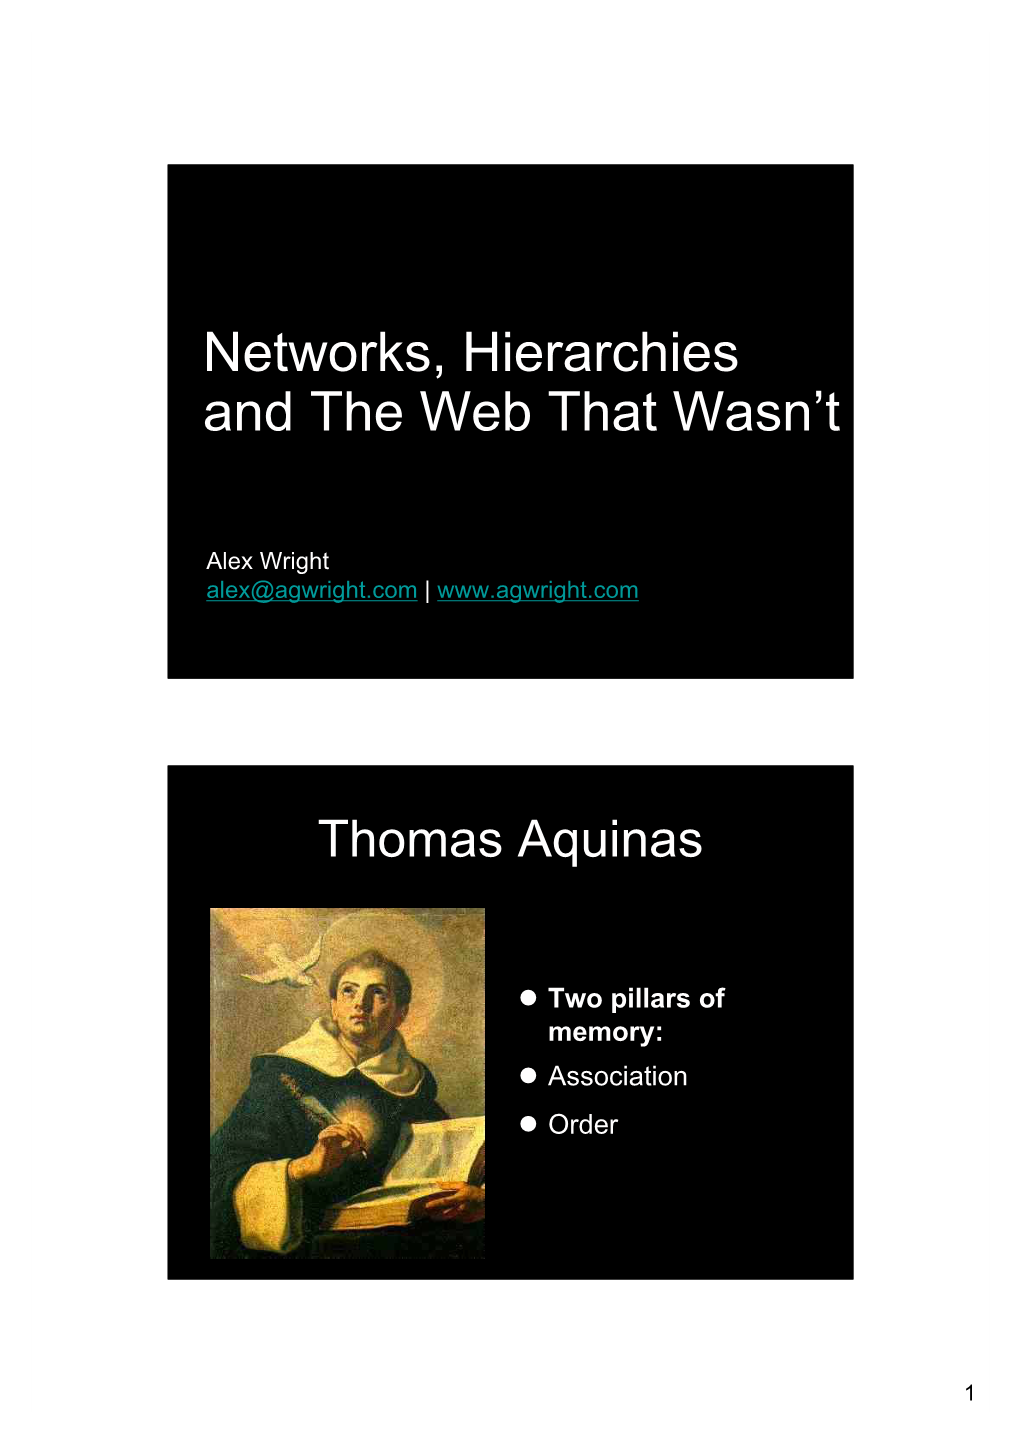 Networks, Hierarchies and the Web That Wasn't